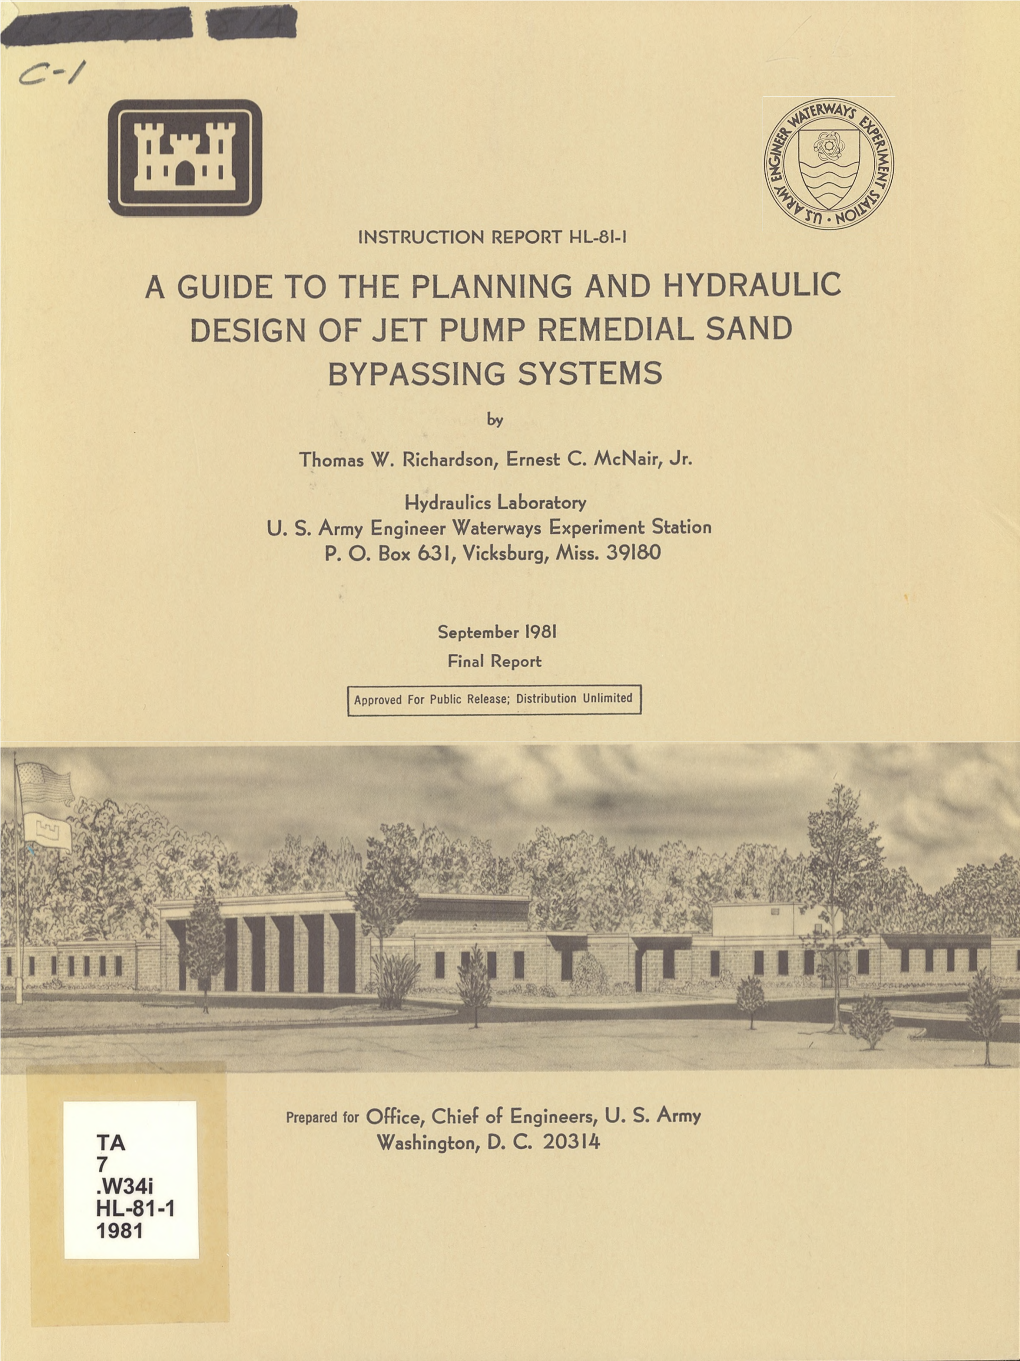 A Guide to the Planning and Hydraulic Design of Jet Pump Remedial Sand Bypassing Systems